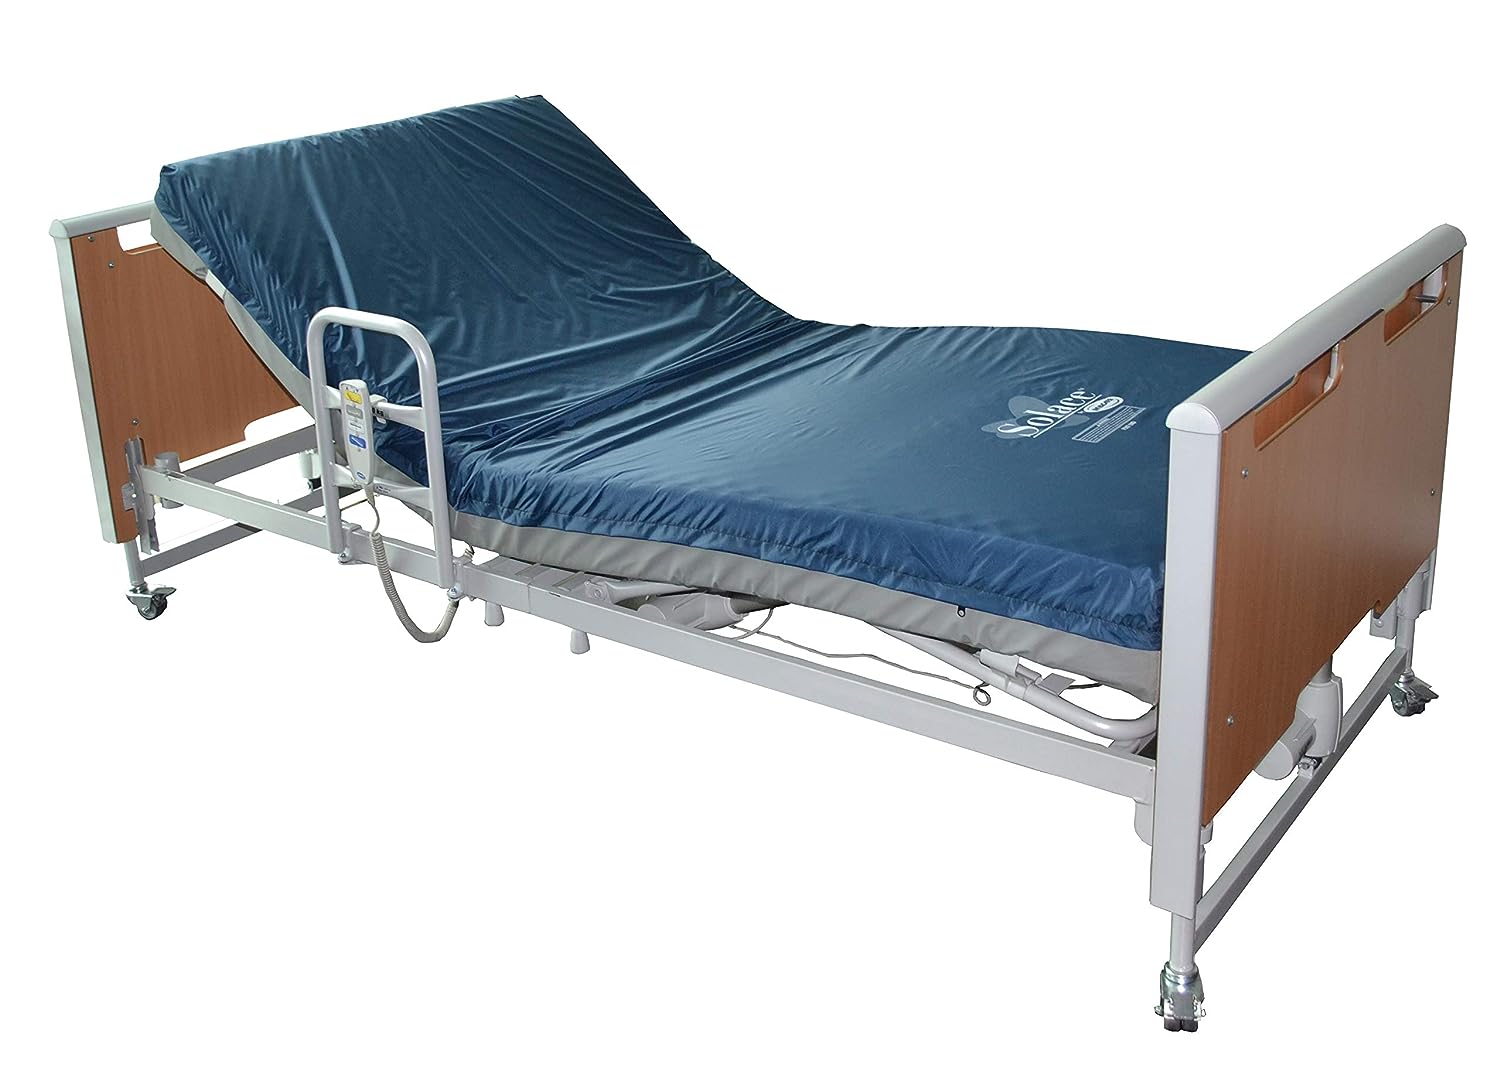 Invacare's Solace Prevention Hospital Bed Mattress, item number SPS1080 displayed on a hospital bed against a white background.